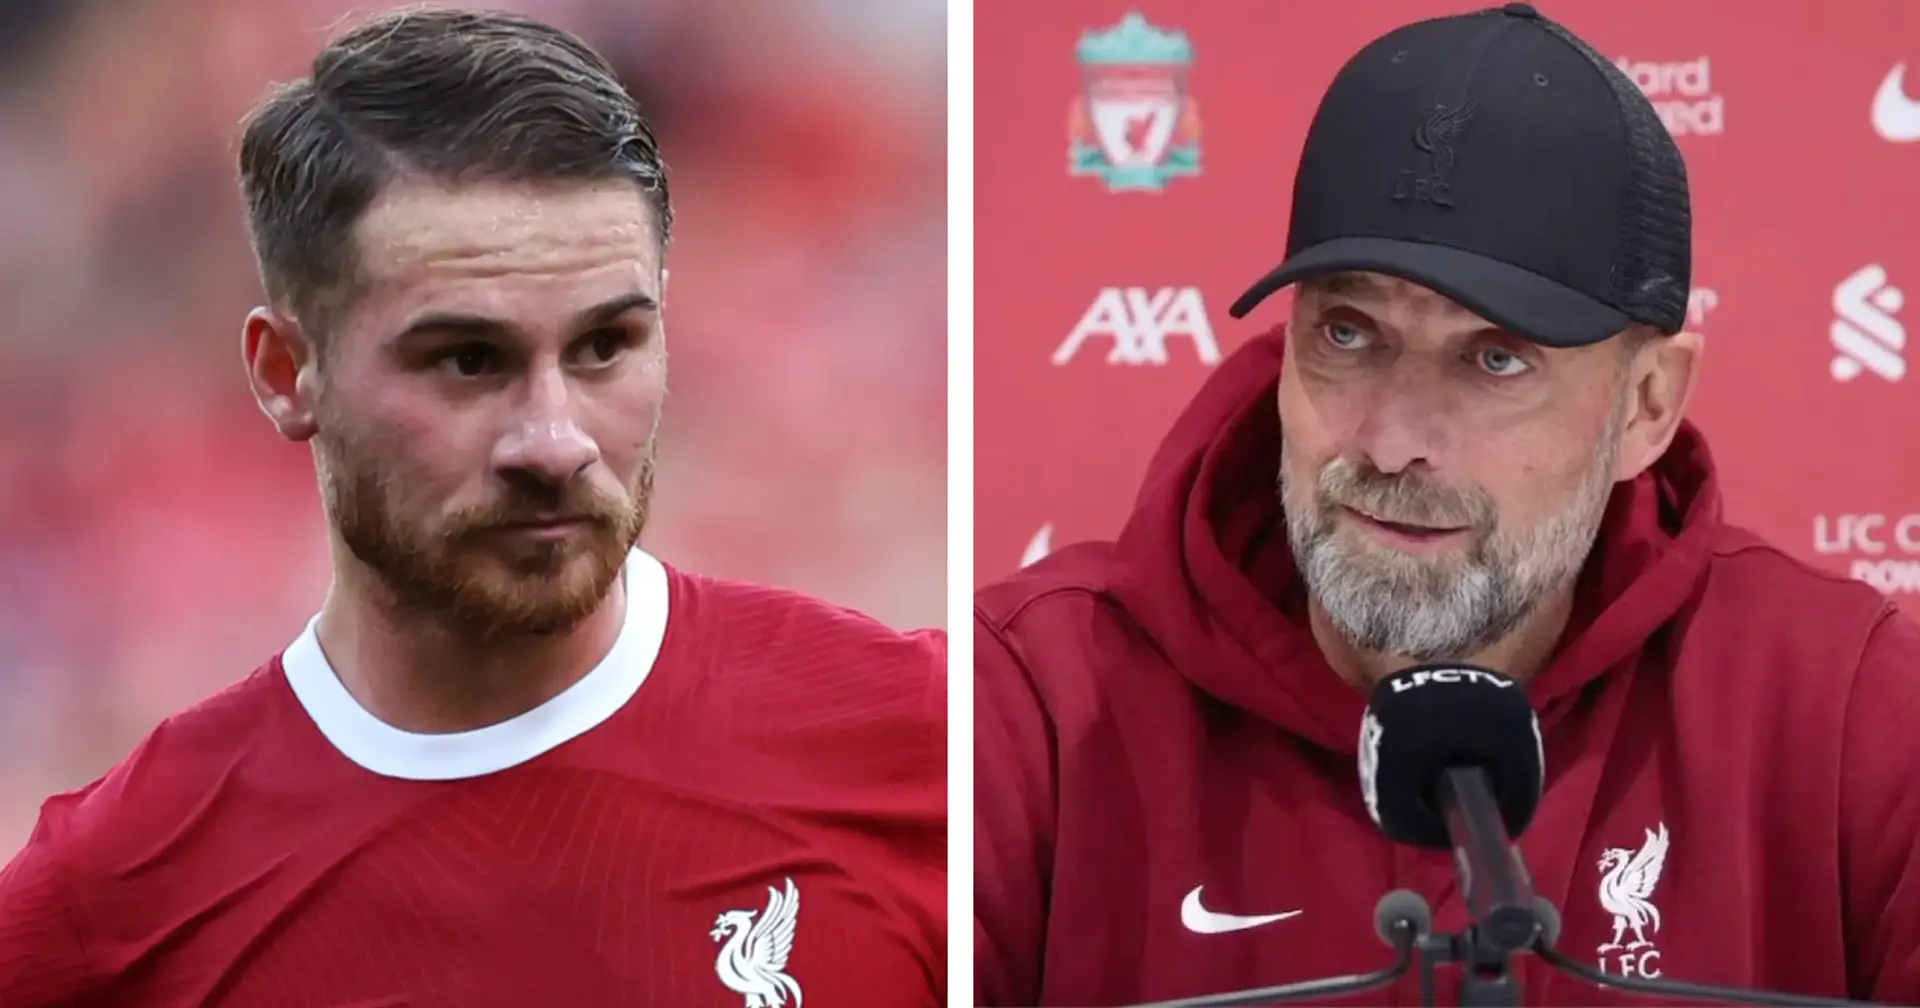 'You have to get rid of structures': Klopp on Mac Allister's transition to no. 6